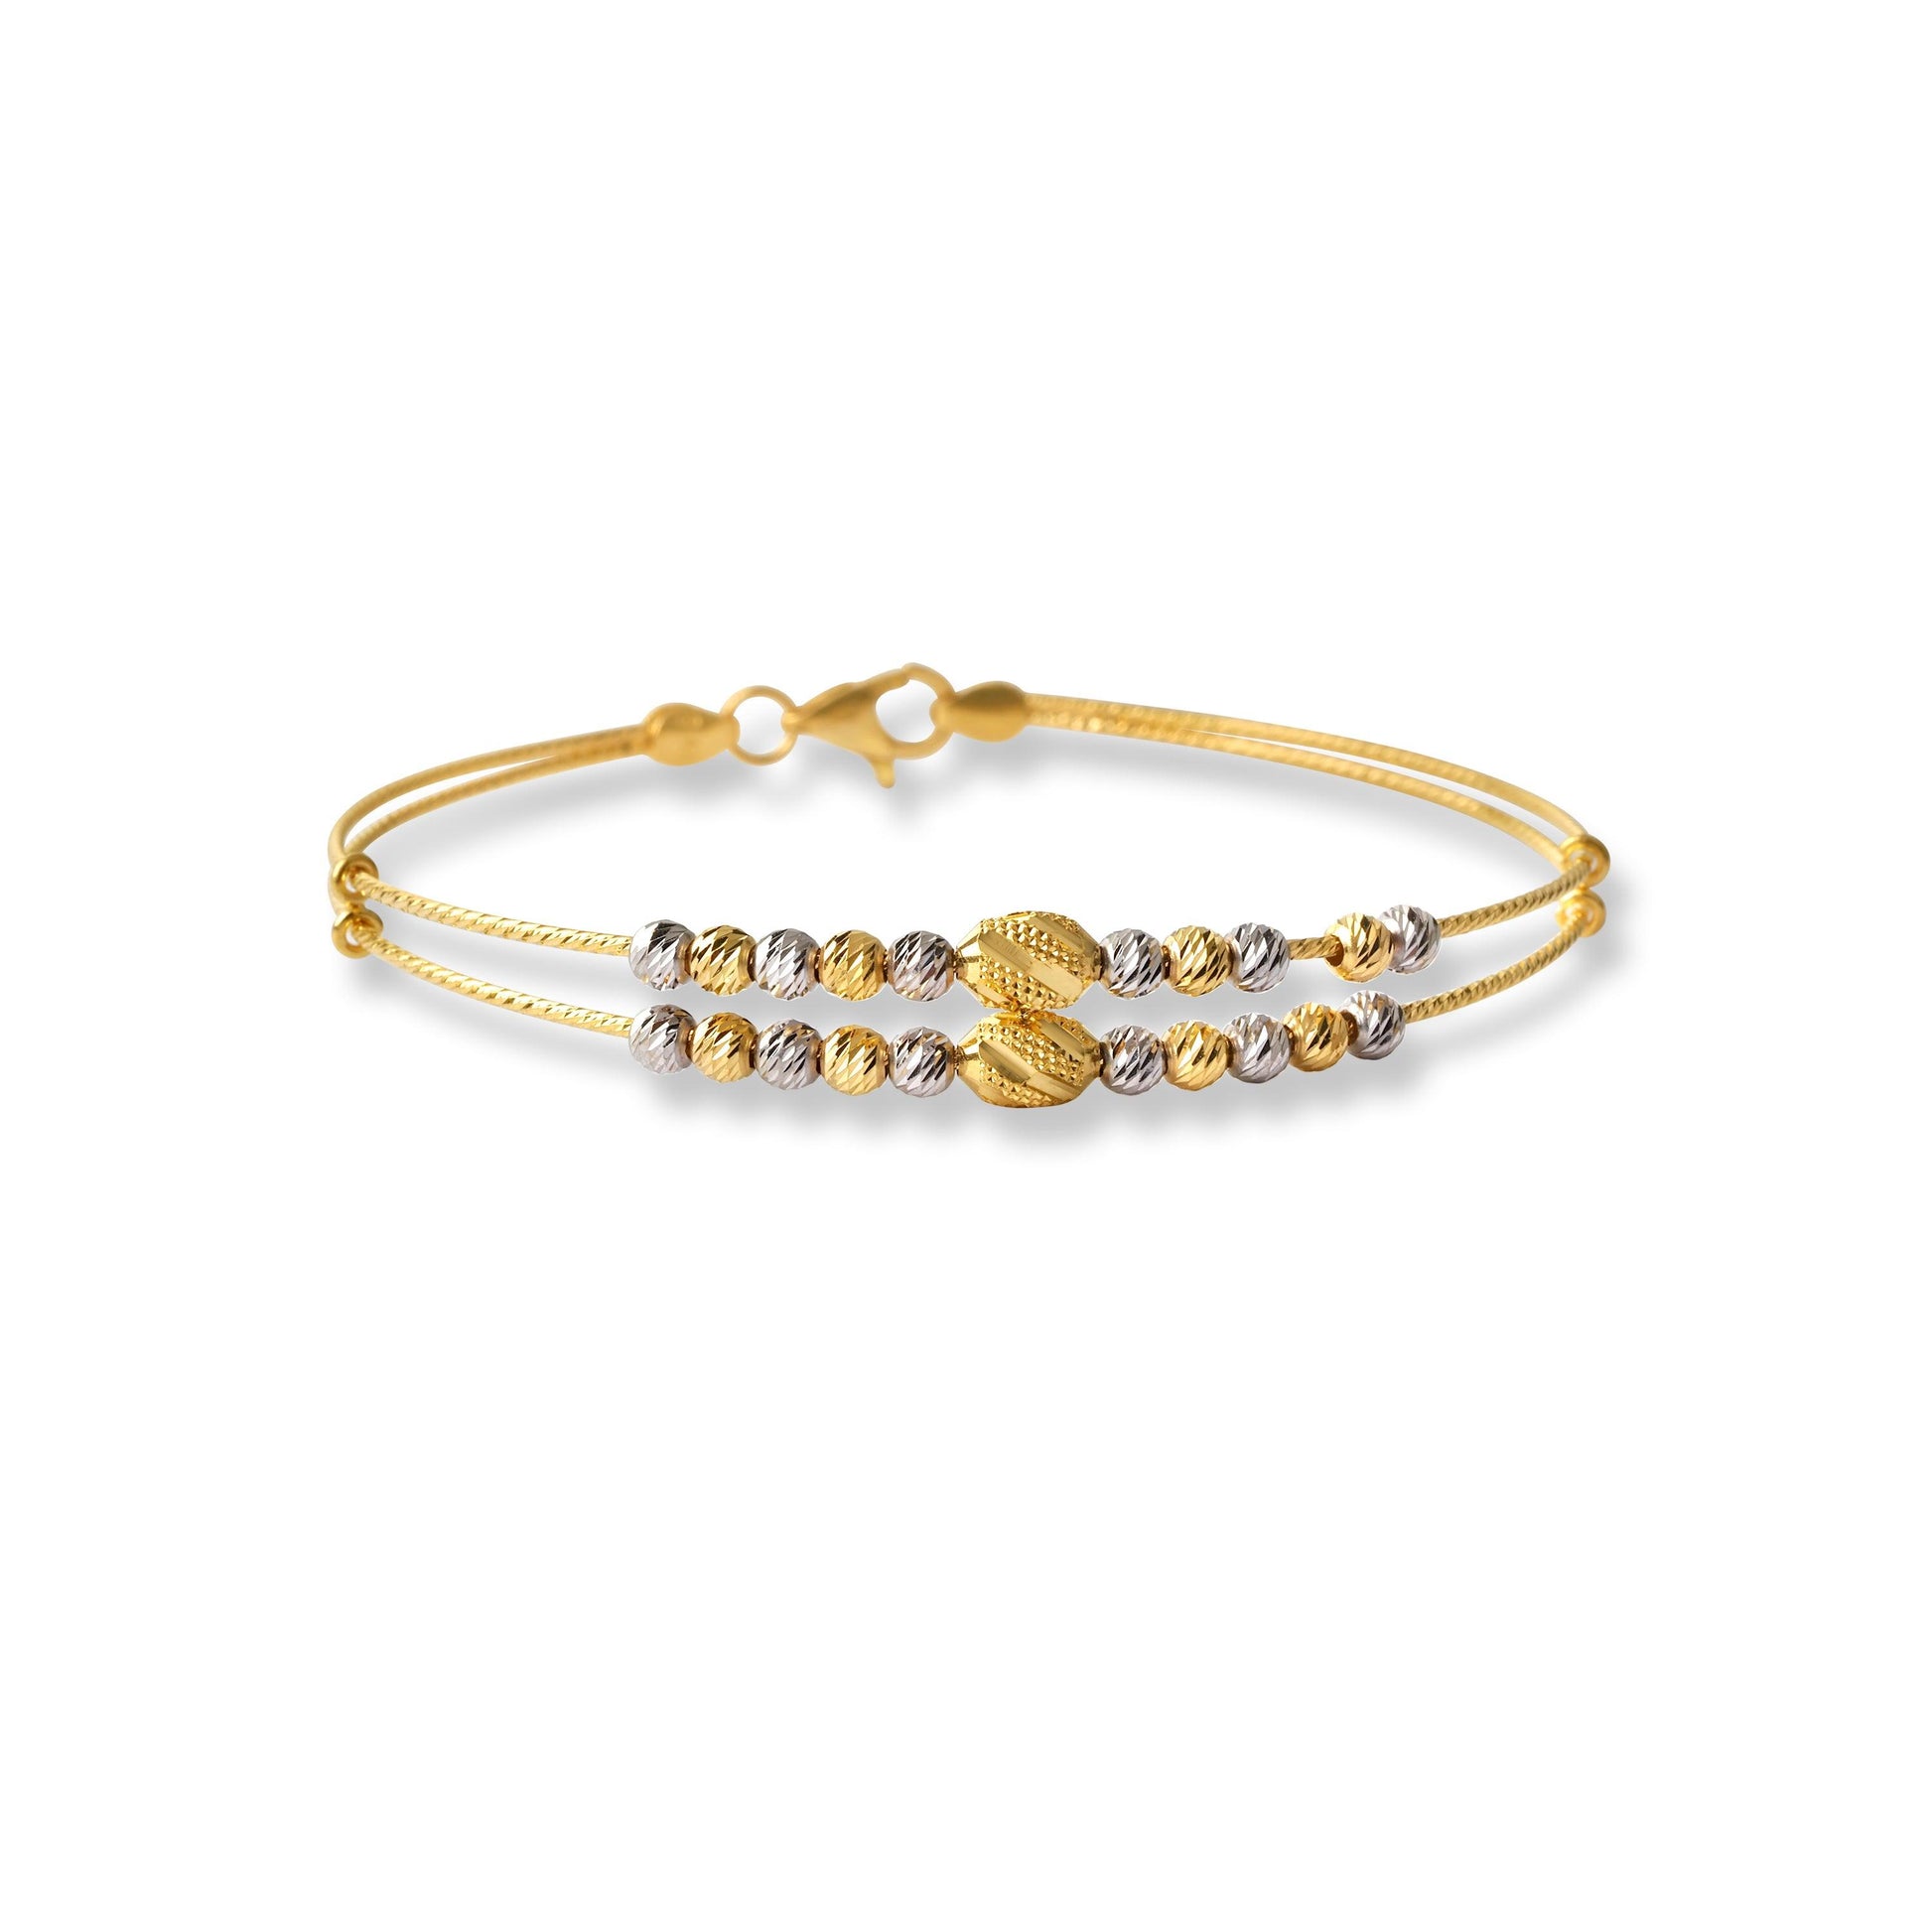 22ct Gold Rhodium Plated Beads Bangle With Rounded Trigger Clasp (6.96g) B-8503 - Minar Jewellers